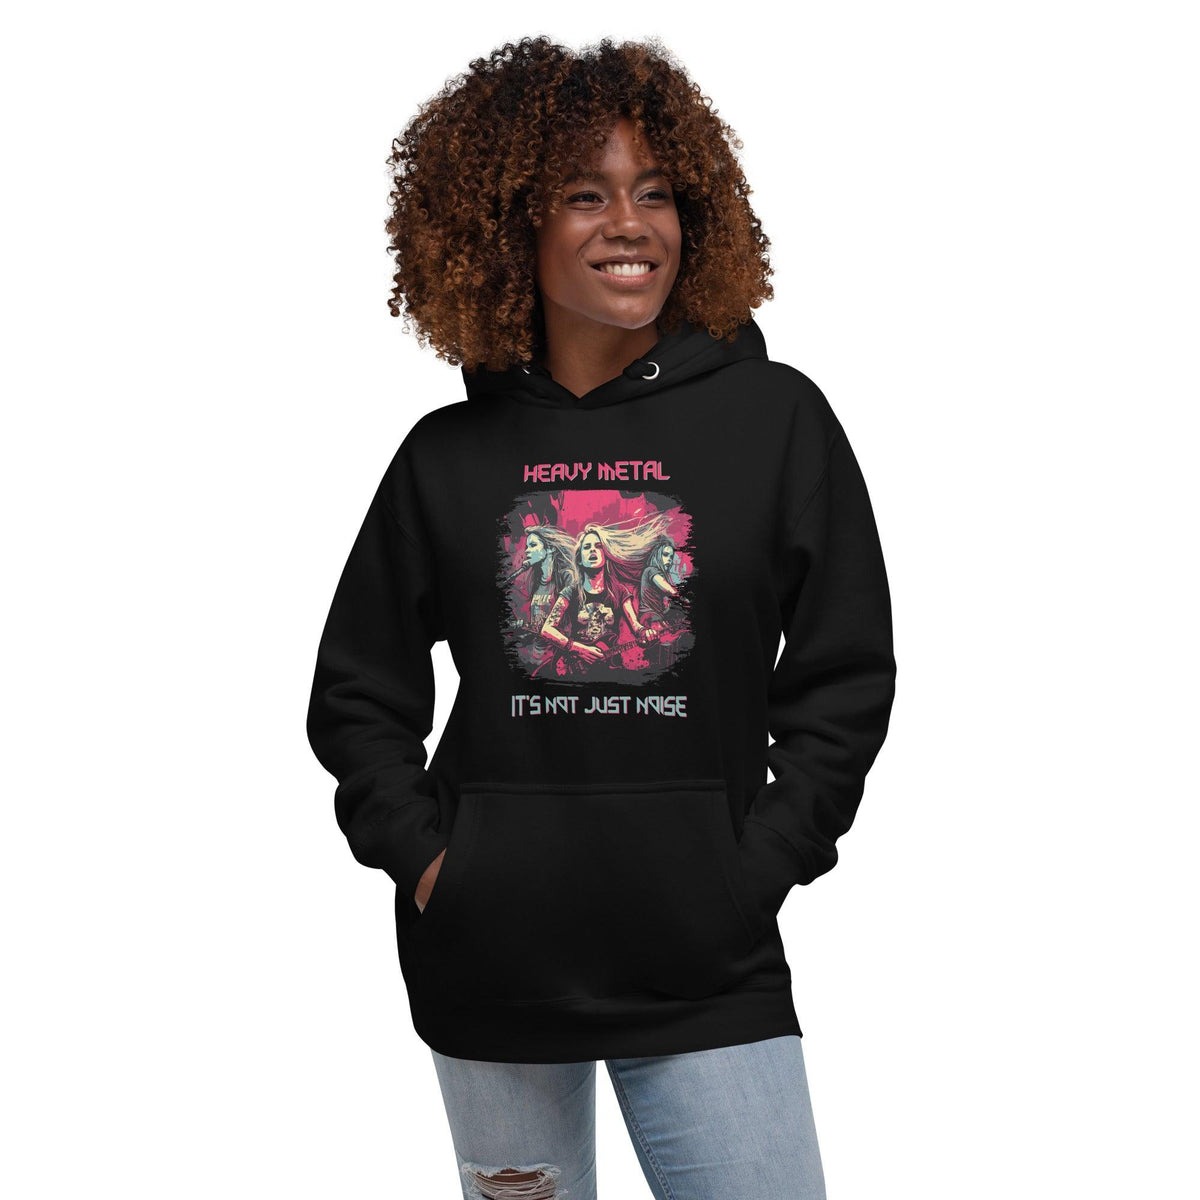 It's Not Just Noise Unisex Hoodie - Beyond T-shirts